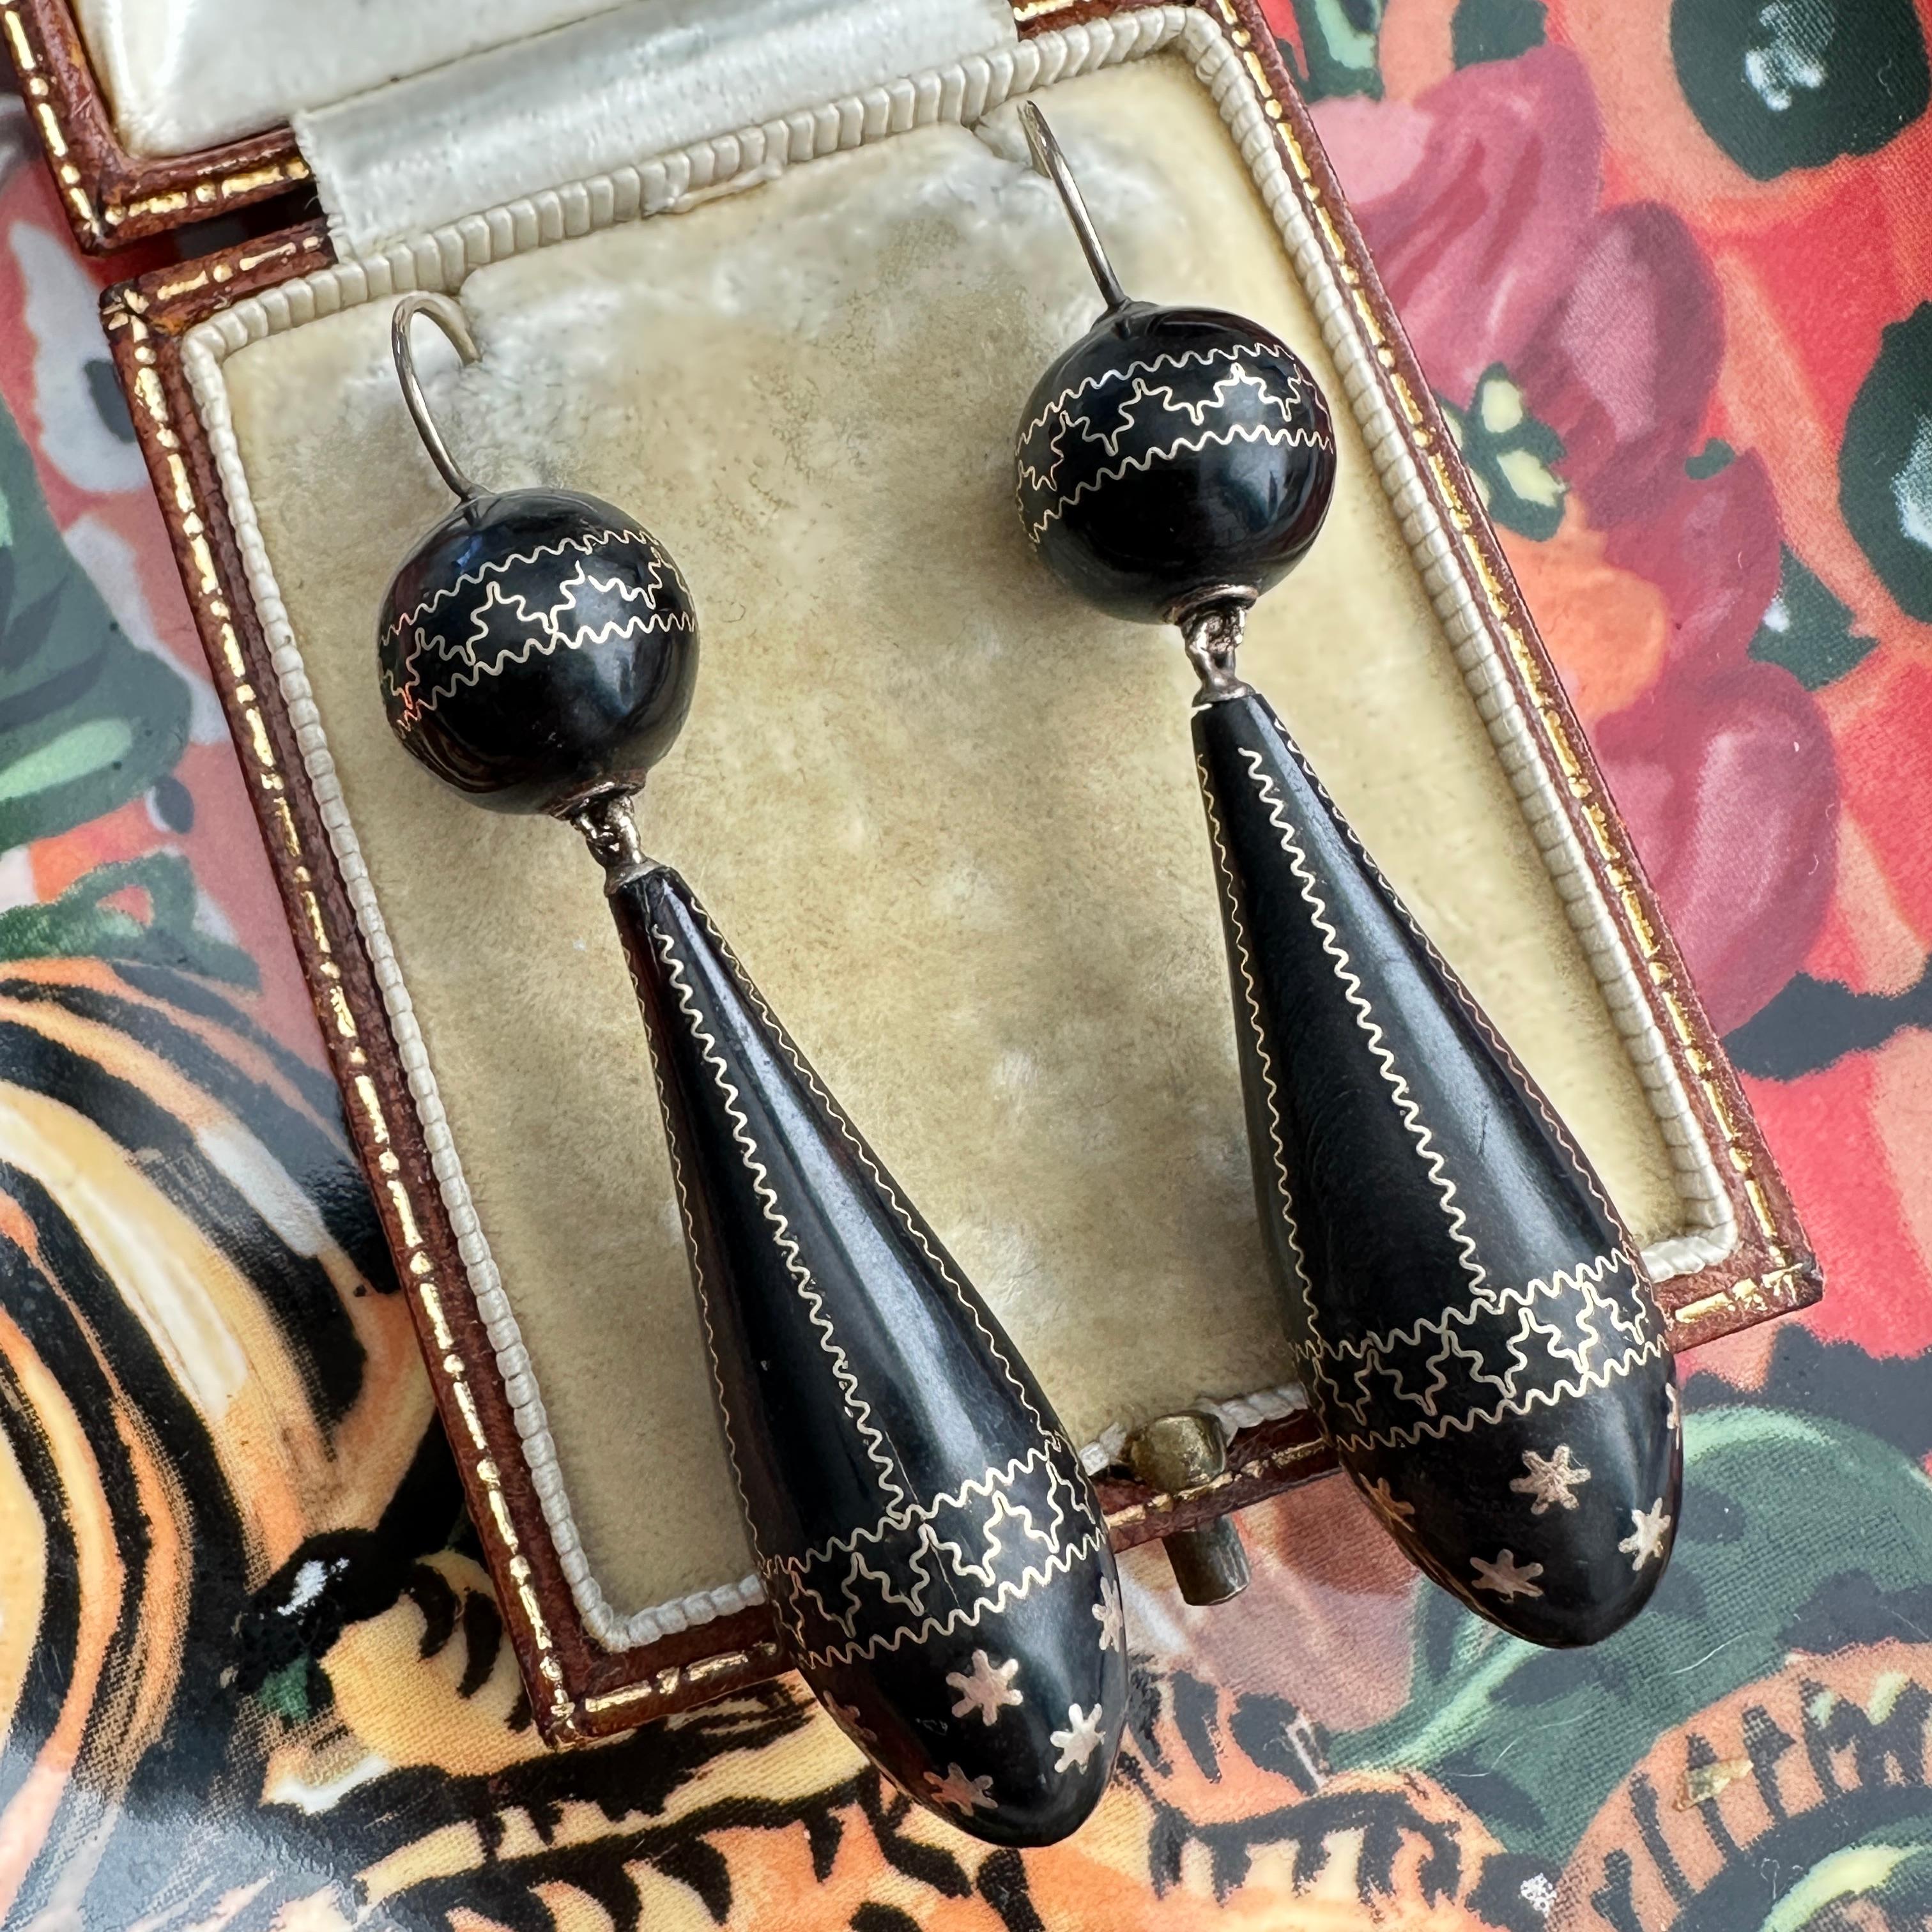 Details: 
Fabulous Victorian black pique work detailed inlay torpedo drop earrings with 14K yellow gold details. These earrings are magnificent, and very dramatic. They have gold inlay with sweet Etruscan and star pattern. There are tiny stars at